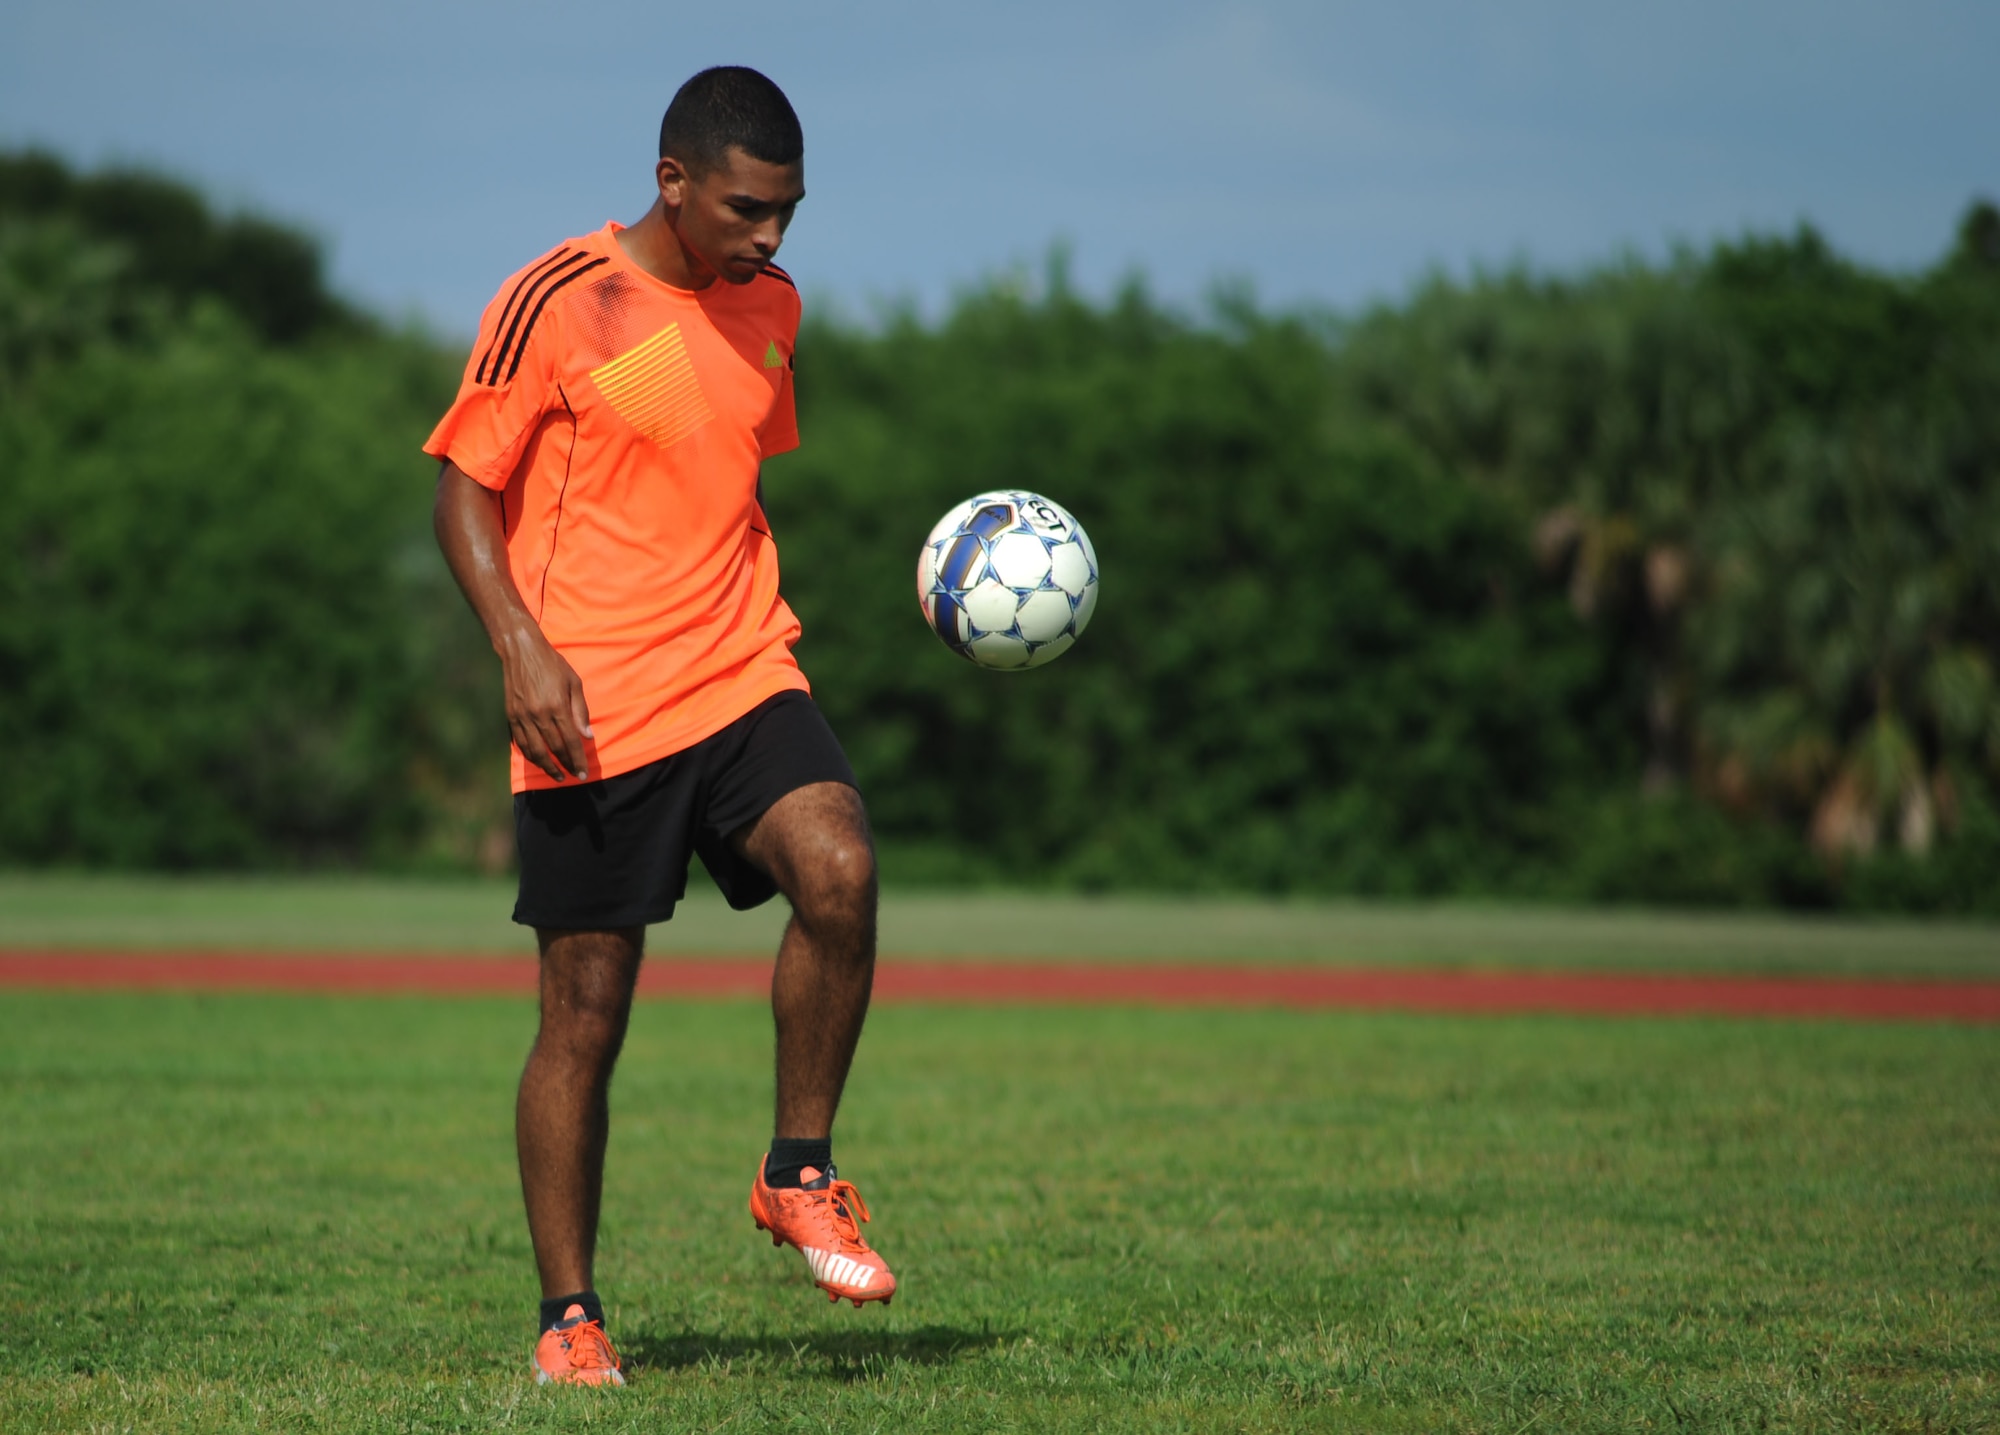 Senior Airman Geovanni Lee, a Milstar technician assigned to the 6th Communications Squadron, juggles a soccer ball during a practice session at MacDill Air Force Base, Fla., August 3, 2016. Lee is one of the captains of the MacDill Football Club, a local soccer team competing in an upcoming national military tournament. (U.S. Air Force photo by Airman Adam R. Shanks)